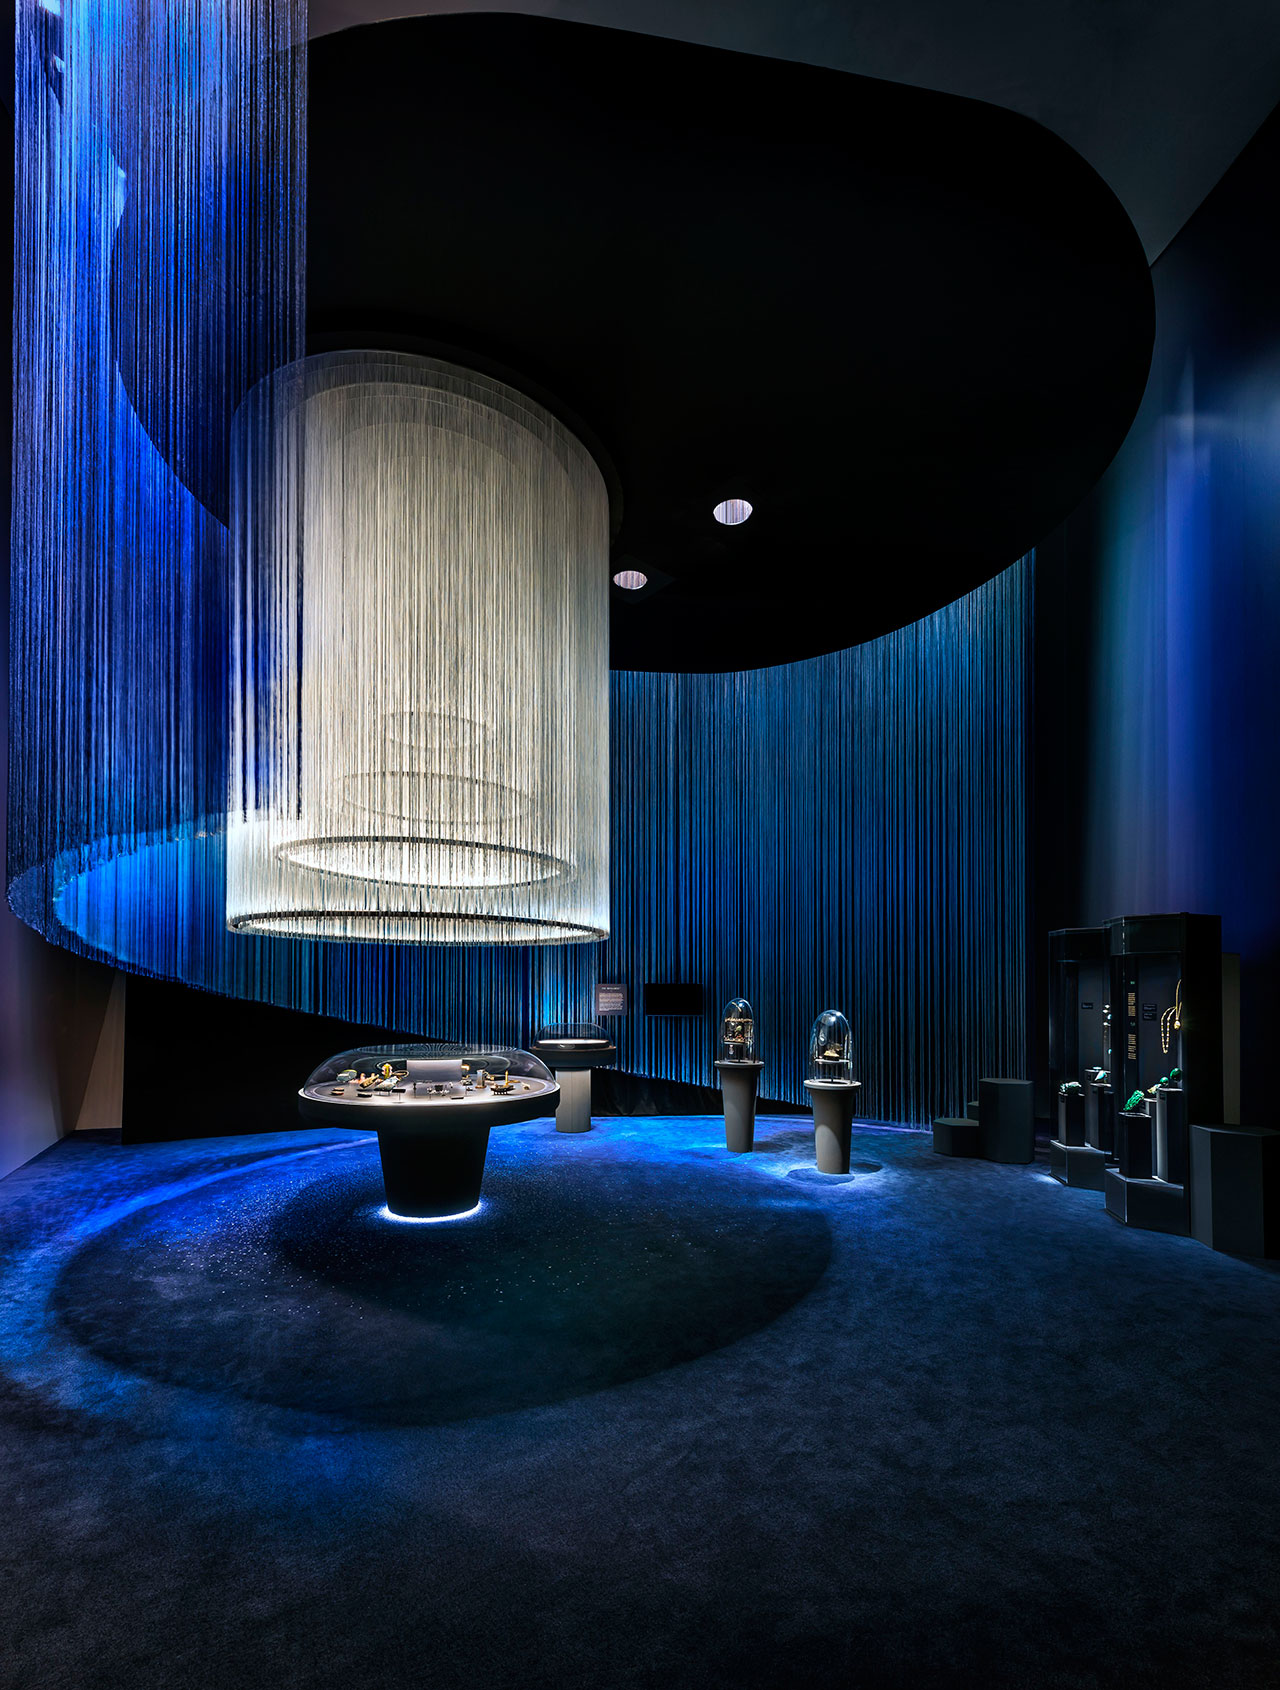 The Art &amp; Science of Gems. Exhibition view. Photo by Edward Hendricks. Courtesy ArtScience Museum at Marina Bay Sands.